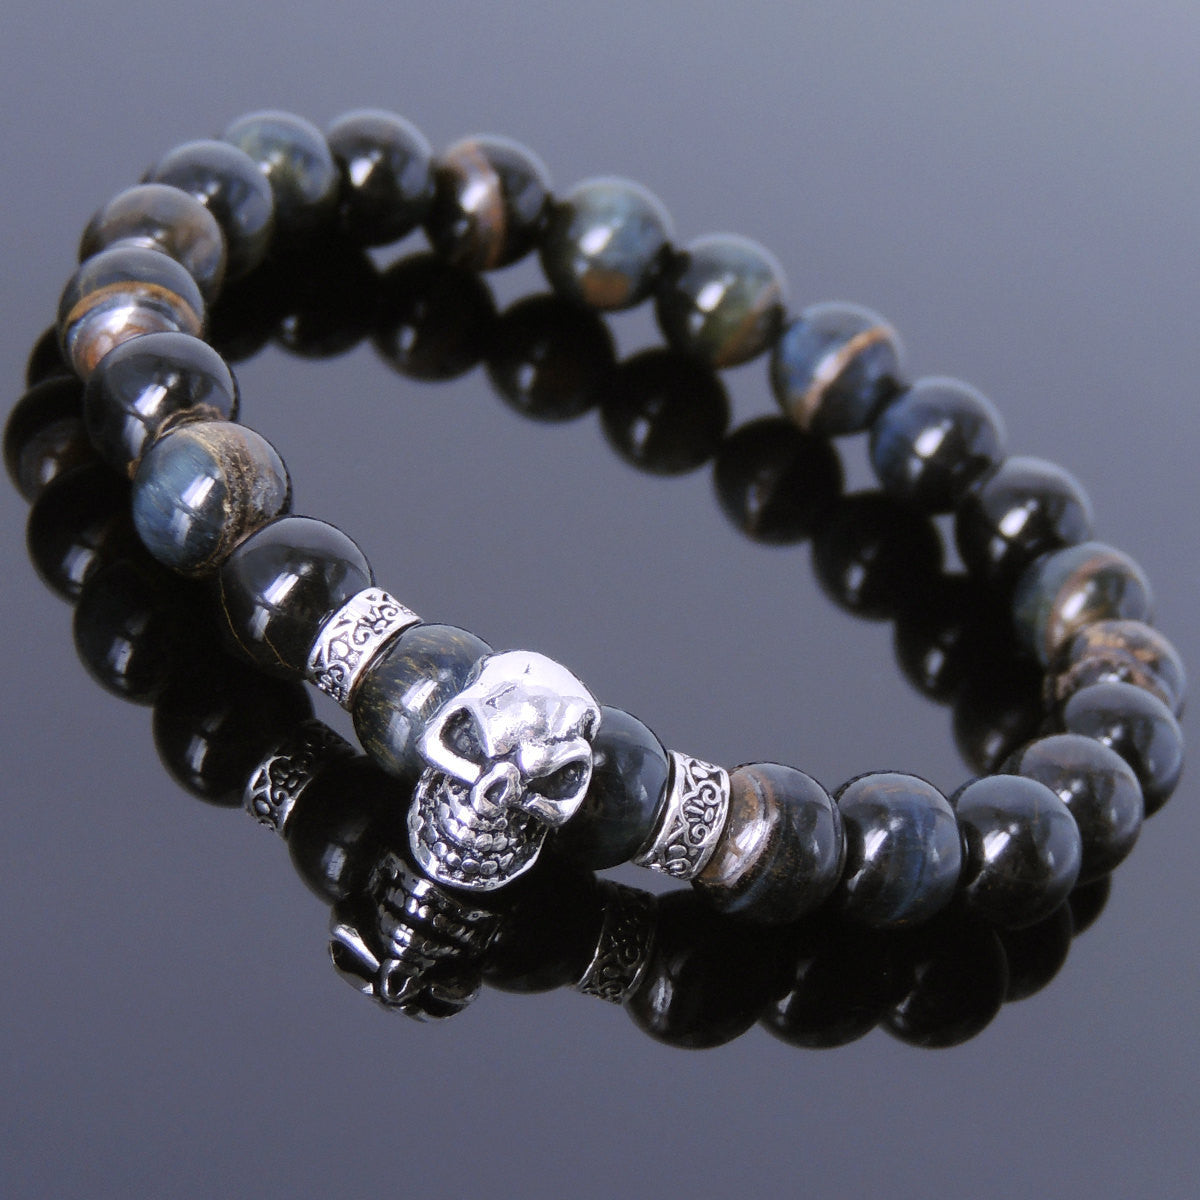 8mm Rare Mixed Blue Tiger Eye Healing Gemstone Bracelet with S925 Sterling Silver Celtic Spacers & Protection Skull Bead - Handmade by Gem & Silver BR694E